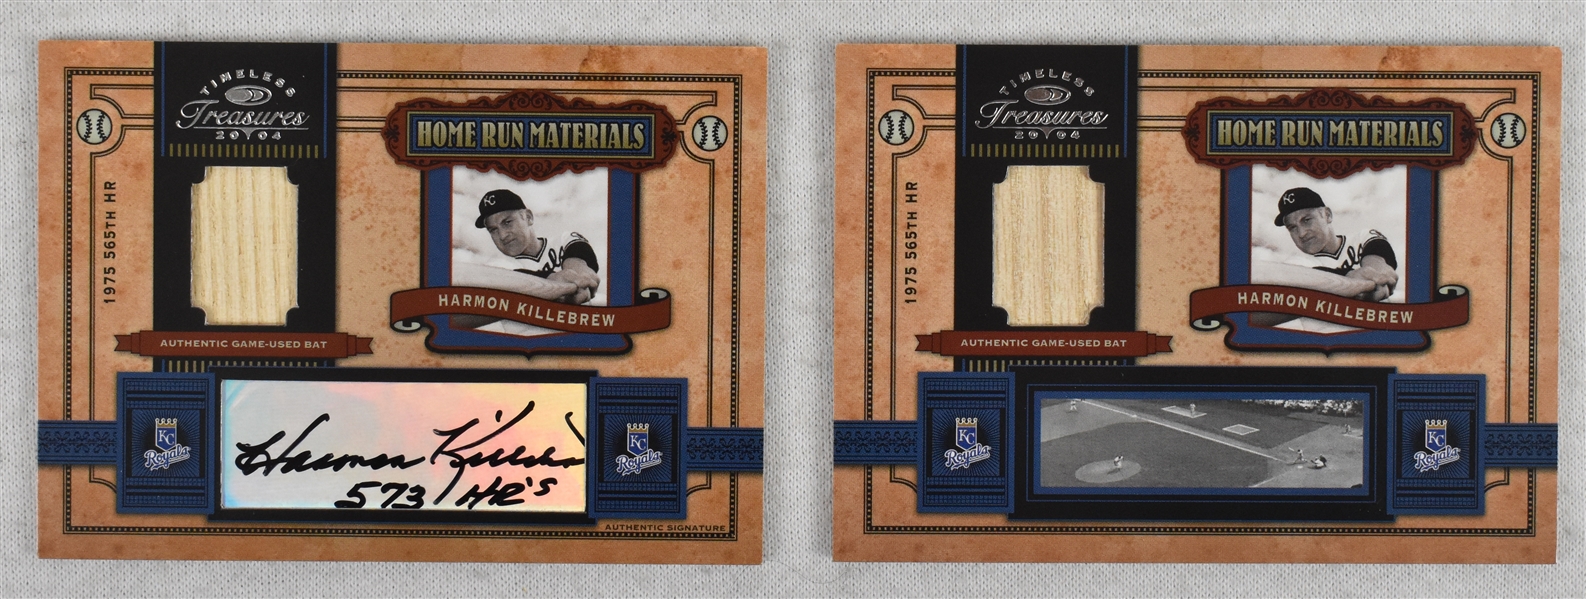 Harmon Killebrew Lot of 2 Game Used & Autographed Inscribed Limited Edition Cards